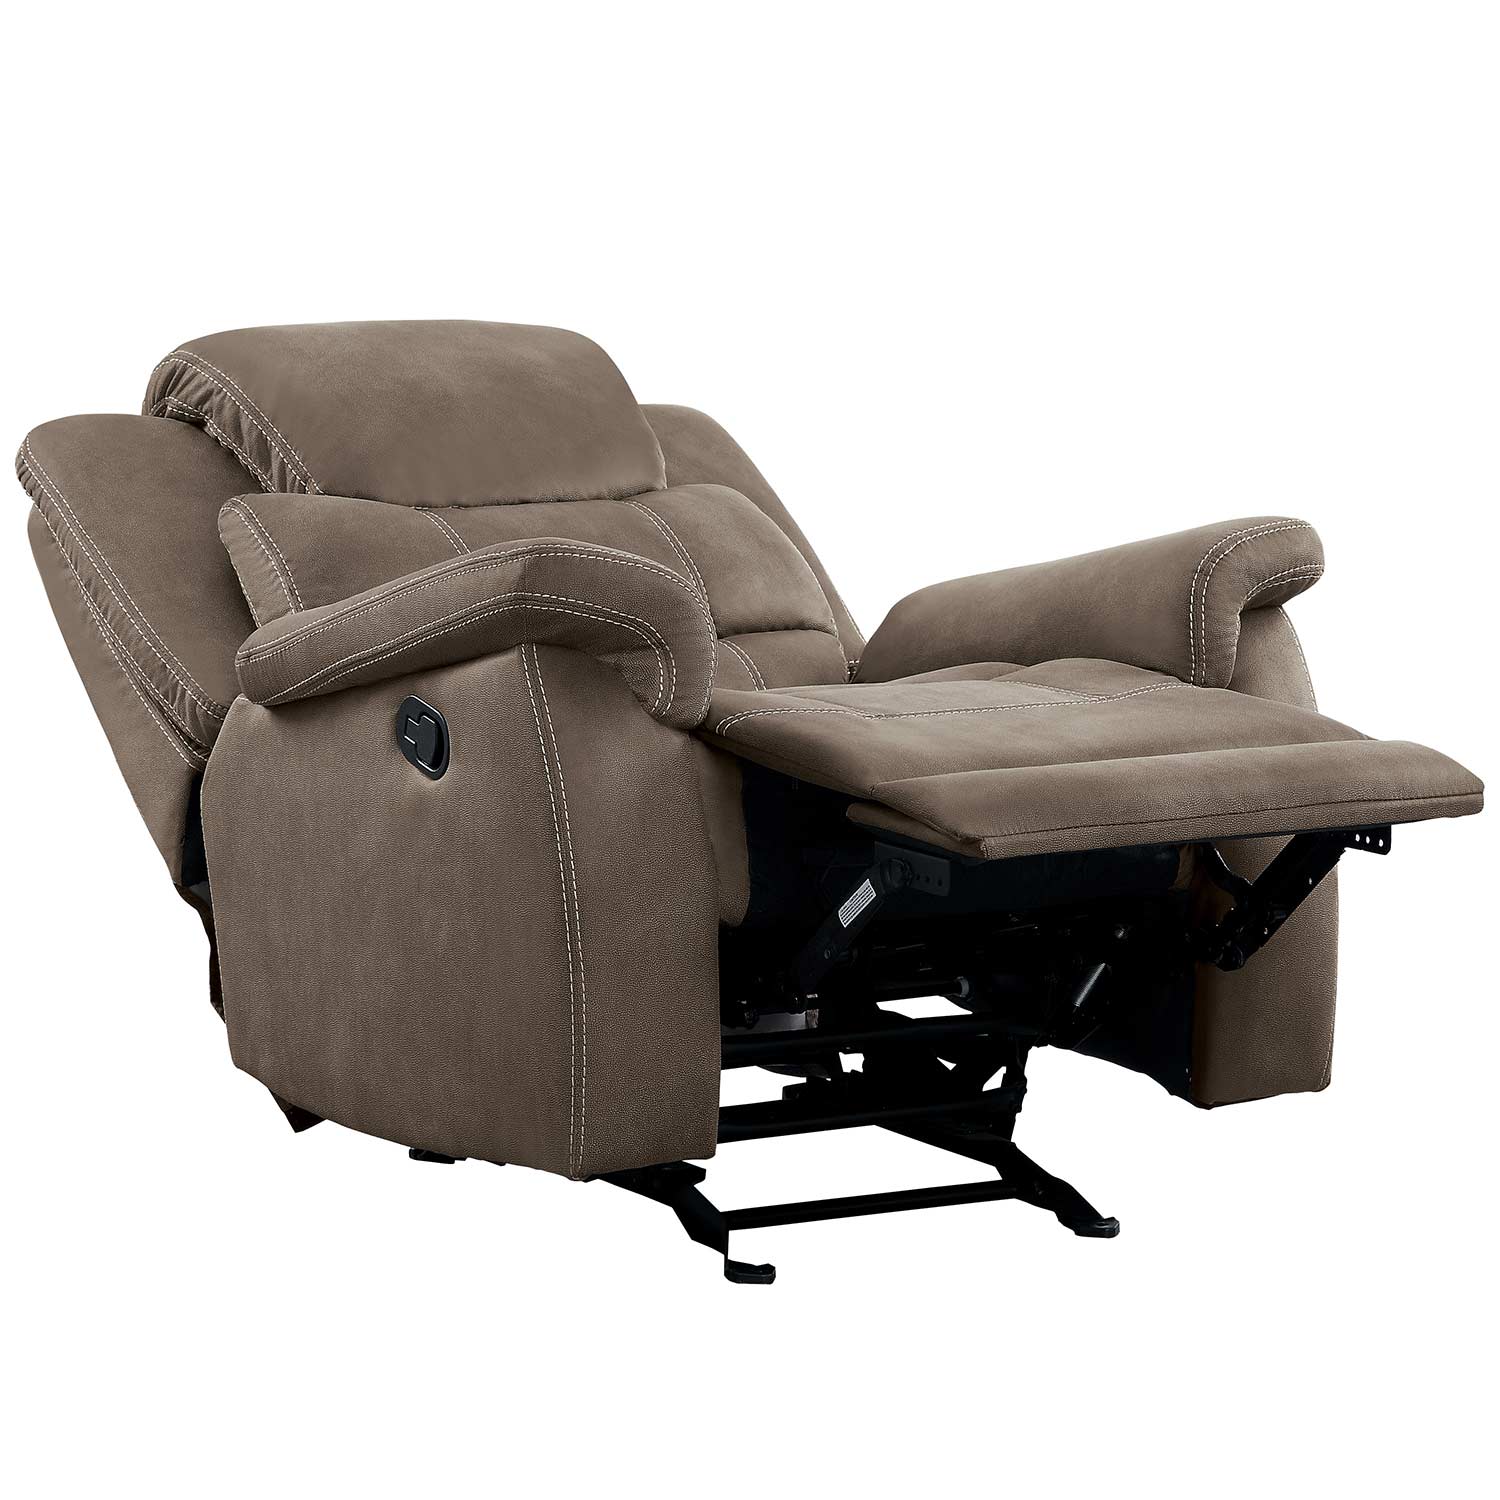 Homelegance Shola Power Reclining Chair with Power Headrest - Brown